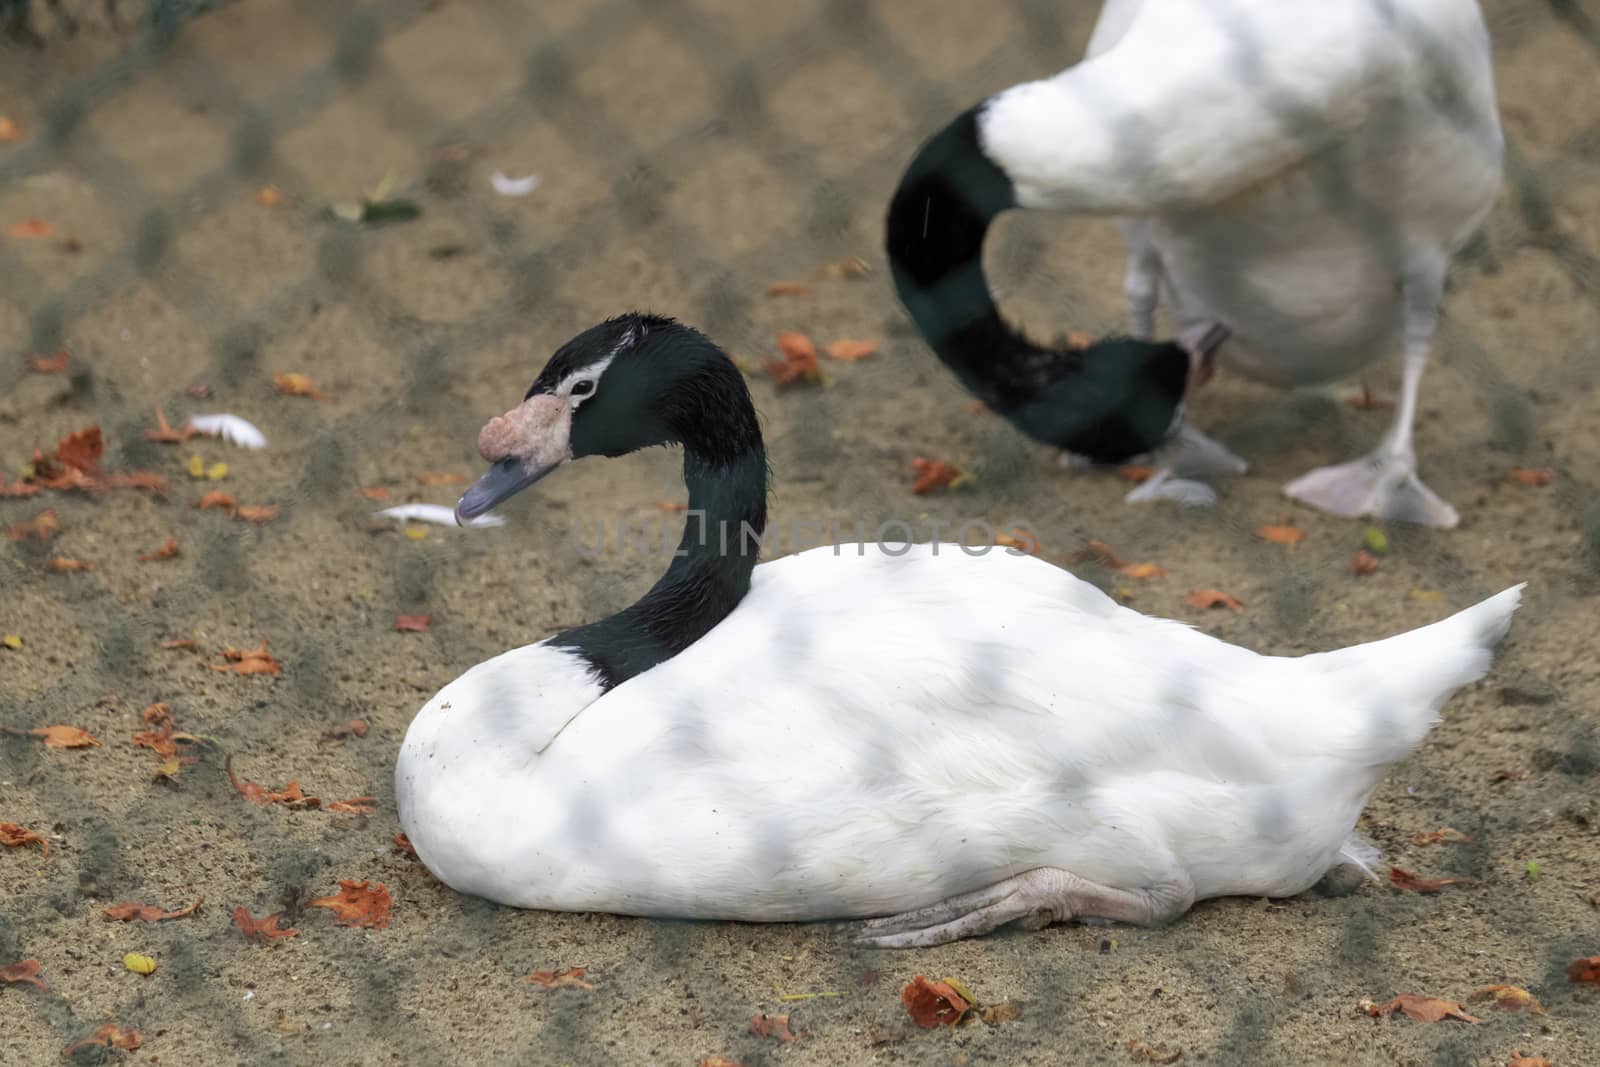 Black Necked Swan Resting on the ground captive environment photograph by nilanka